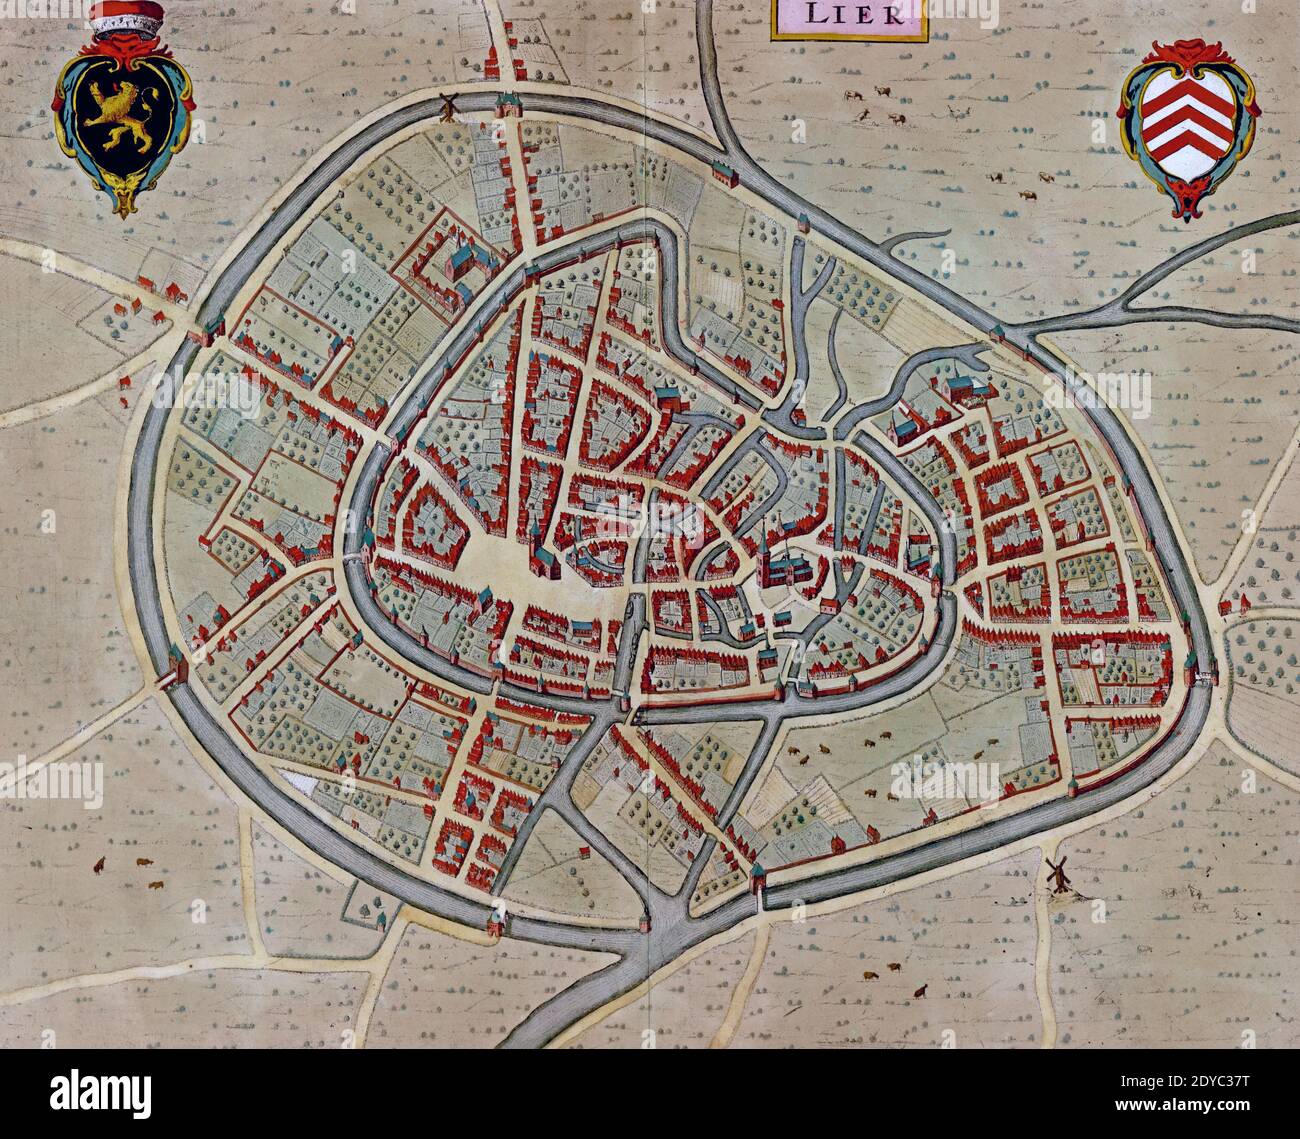 An illustration of the antique map of fortifications in Utrecht, The Netherlands Stock Photo